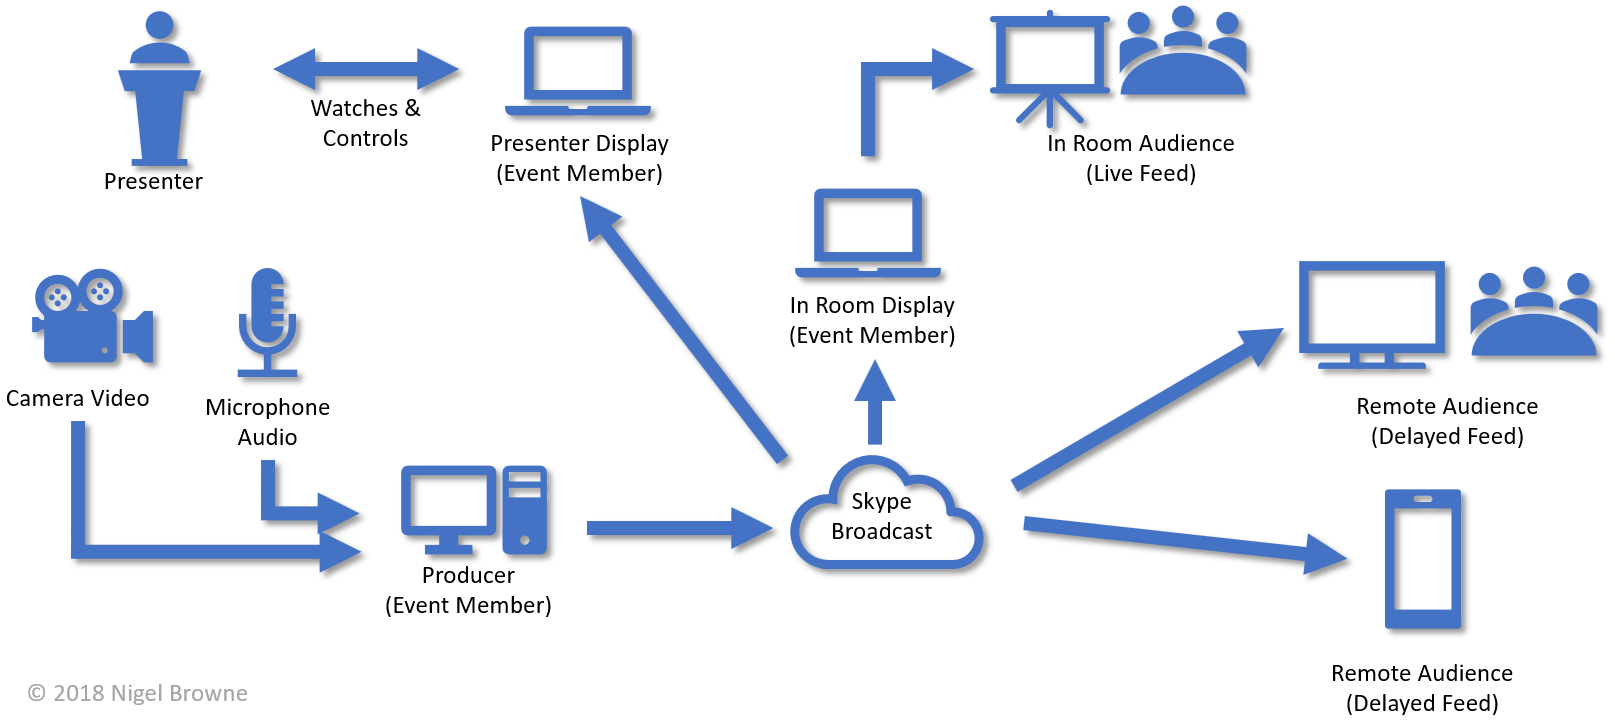 Setup for Skype Broadcast with an in-room audience